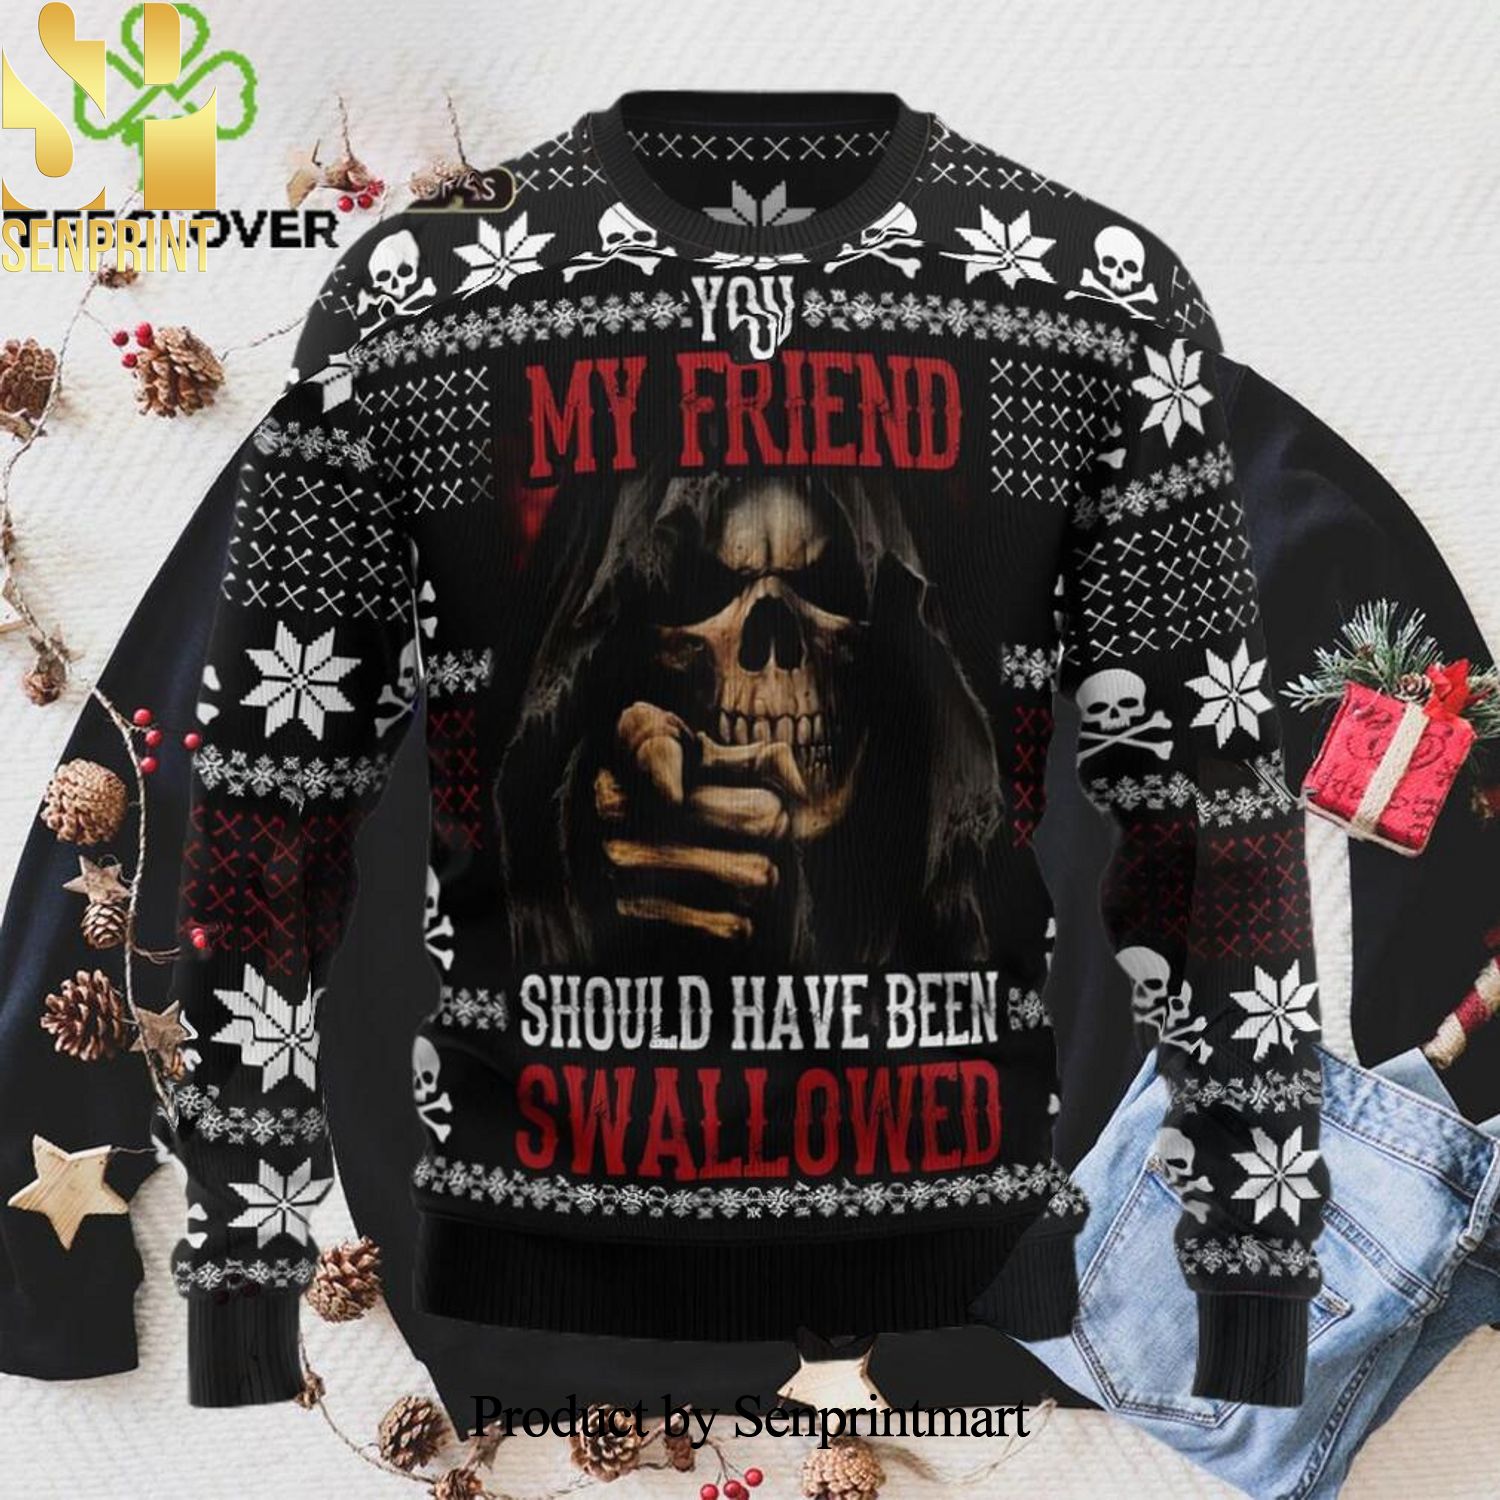 You My Friend Should Have Been Swallowed Christmas Wool Knitted 3D Sweater